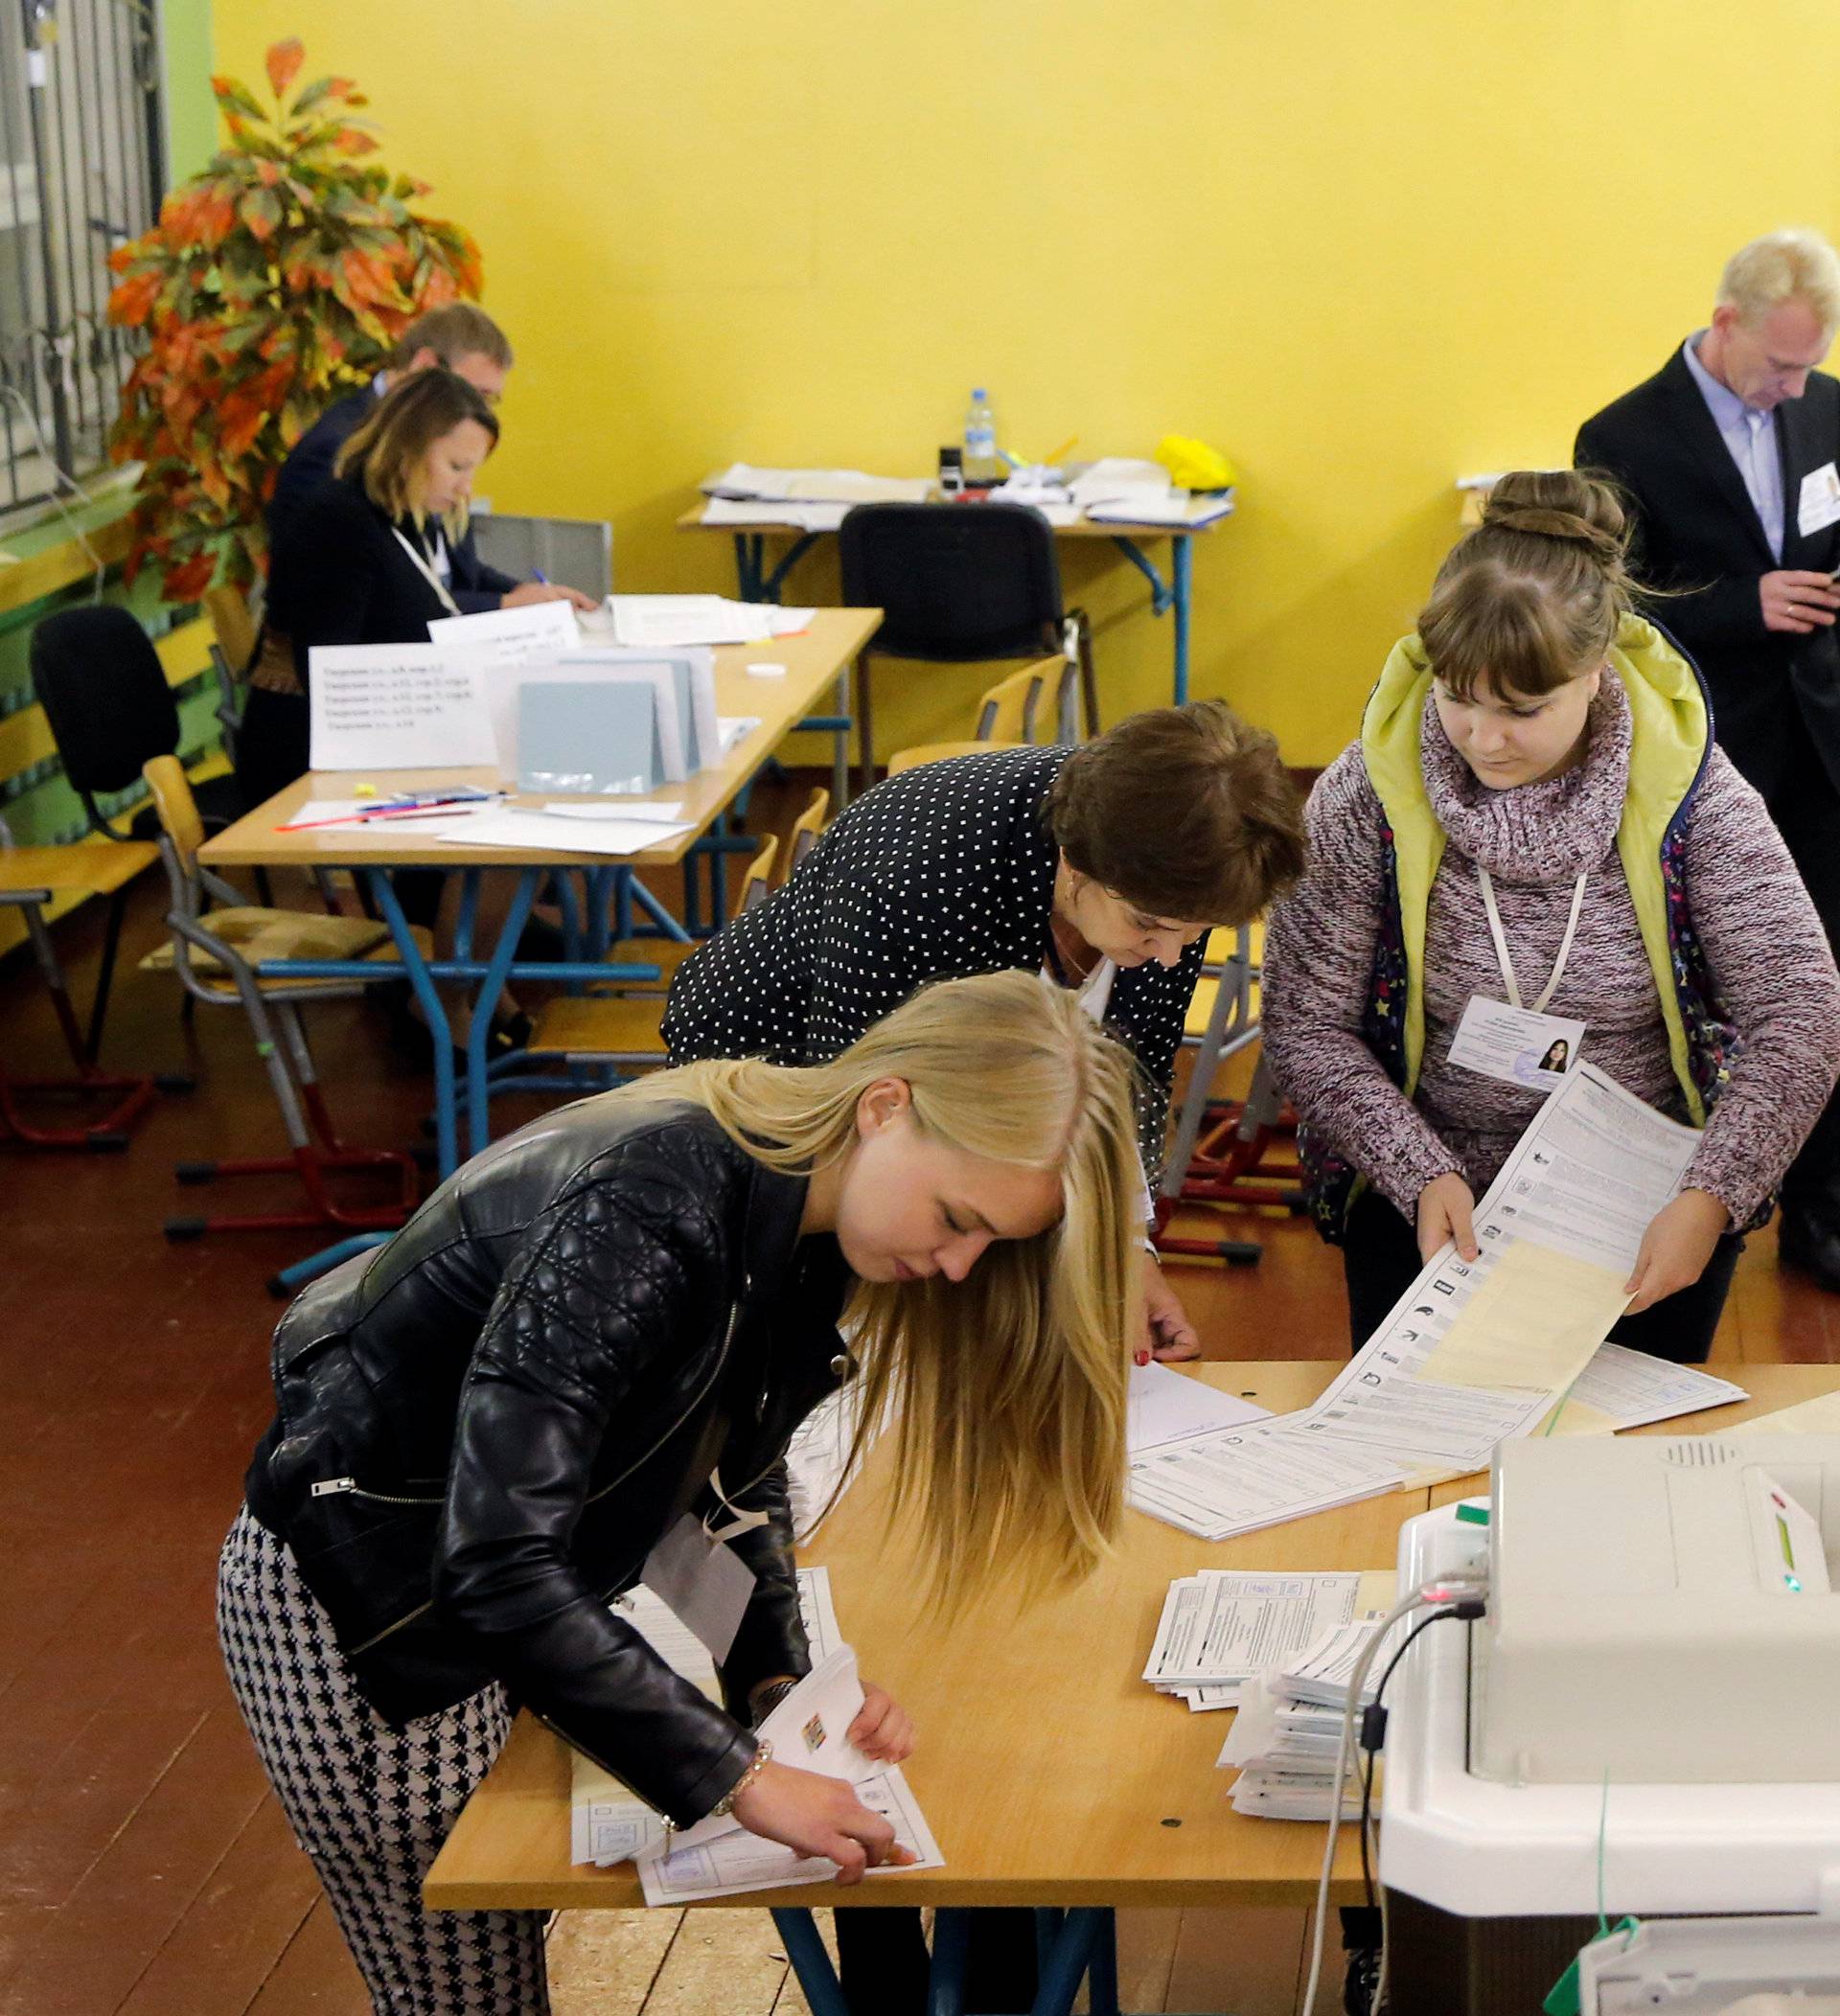 Members of a local election commission count unused ballots at a polling station following a parliamentary election in Moscow